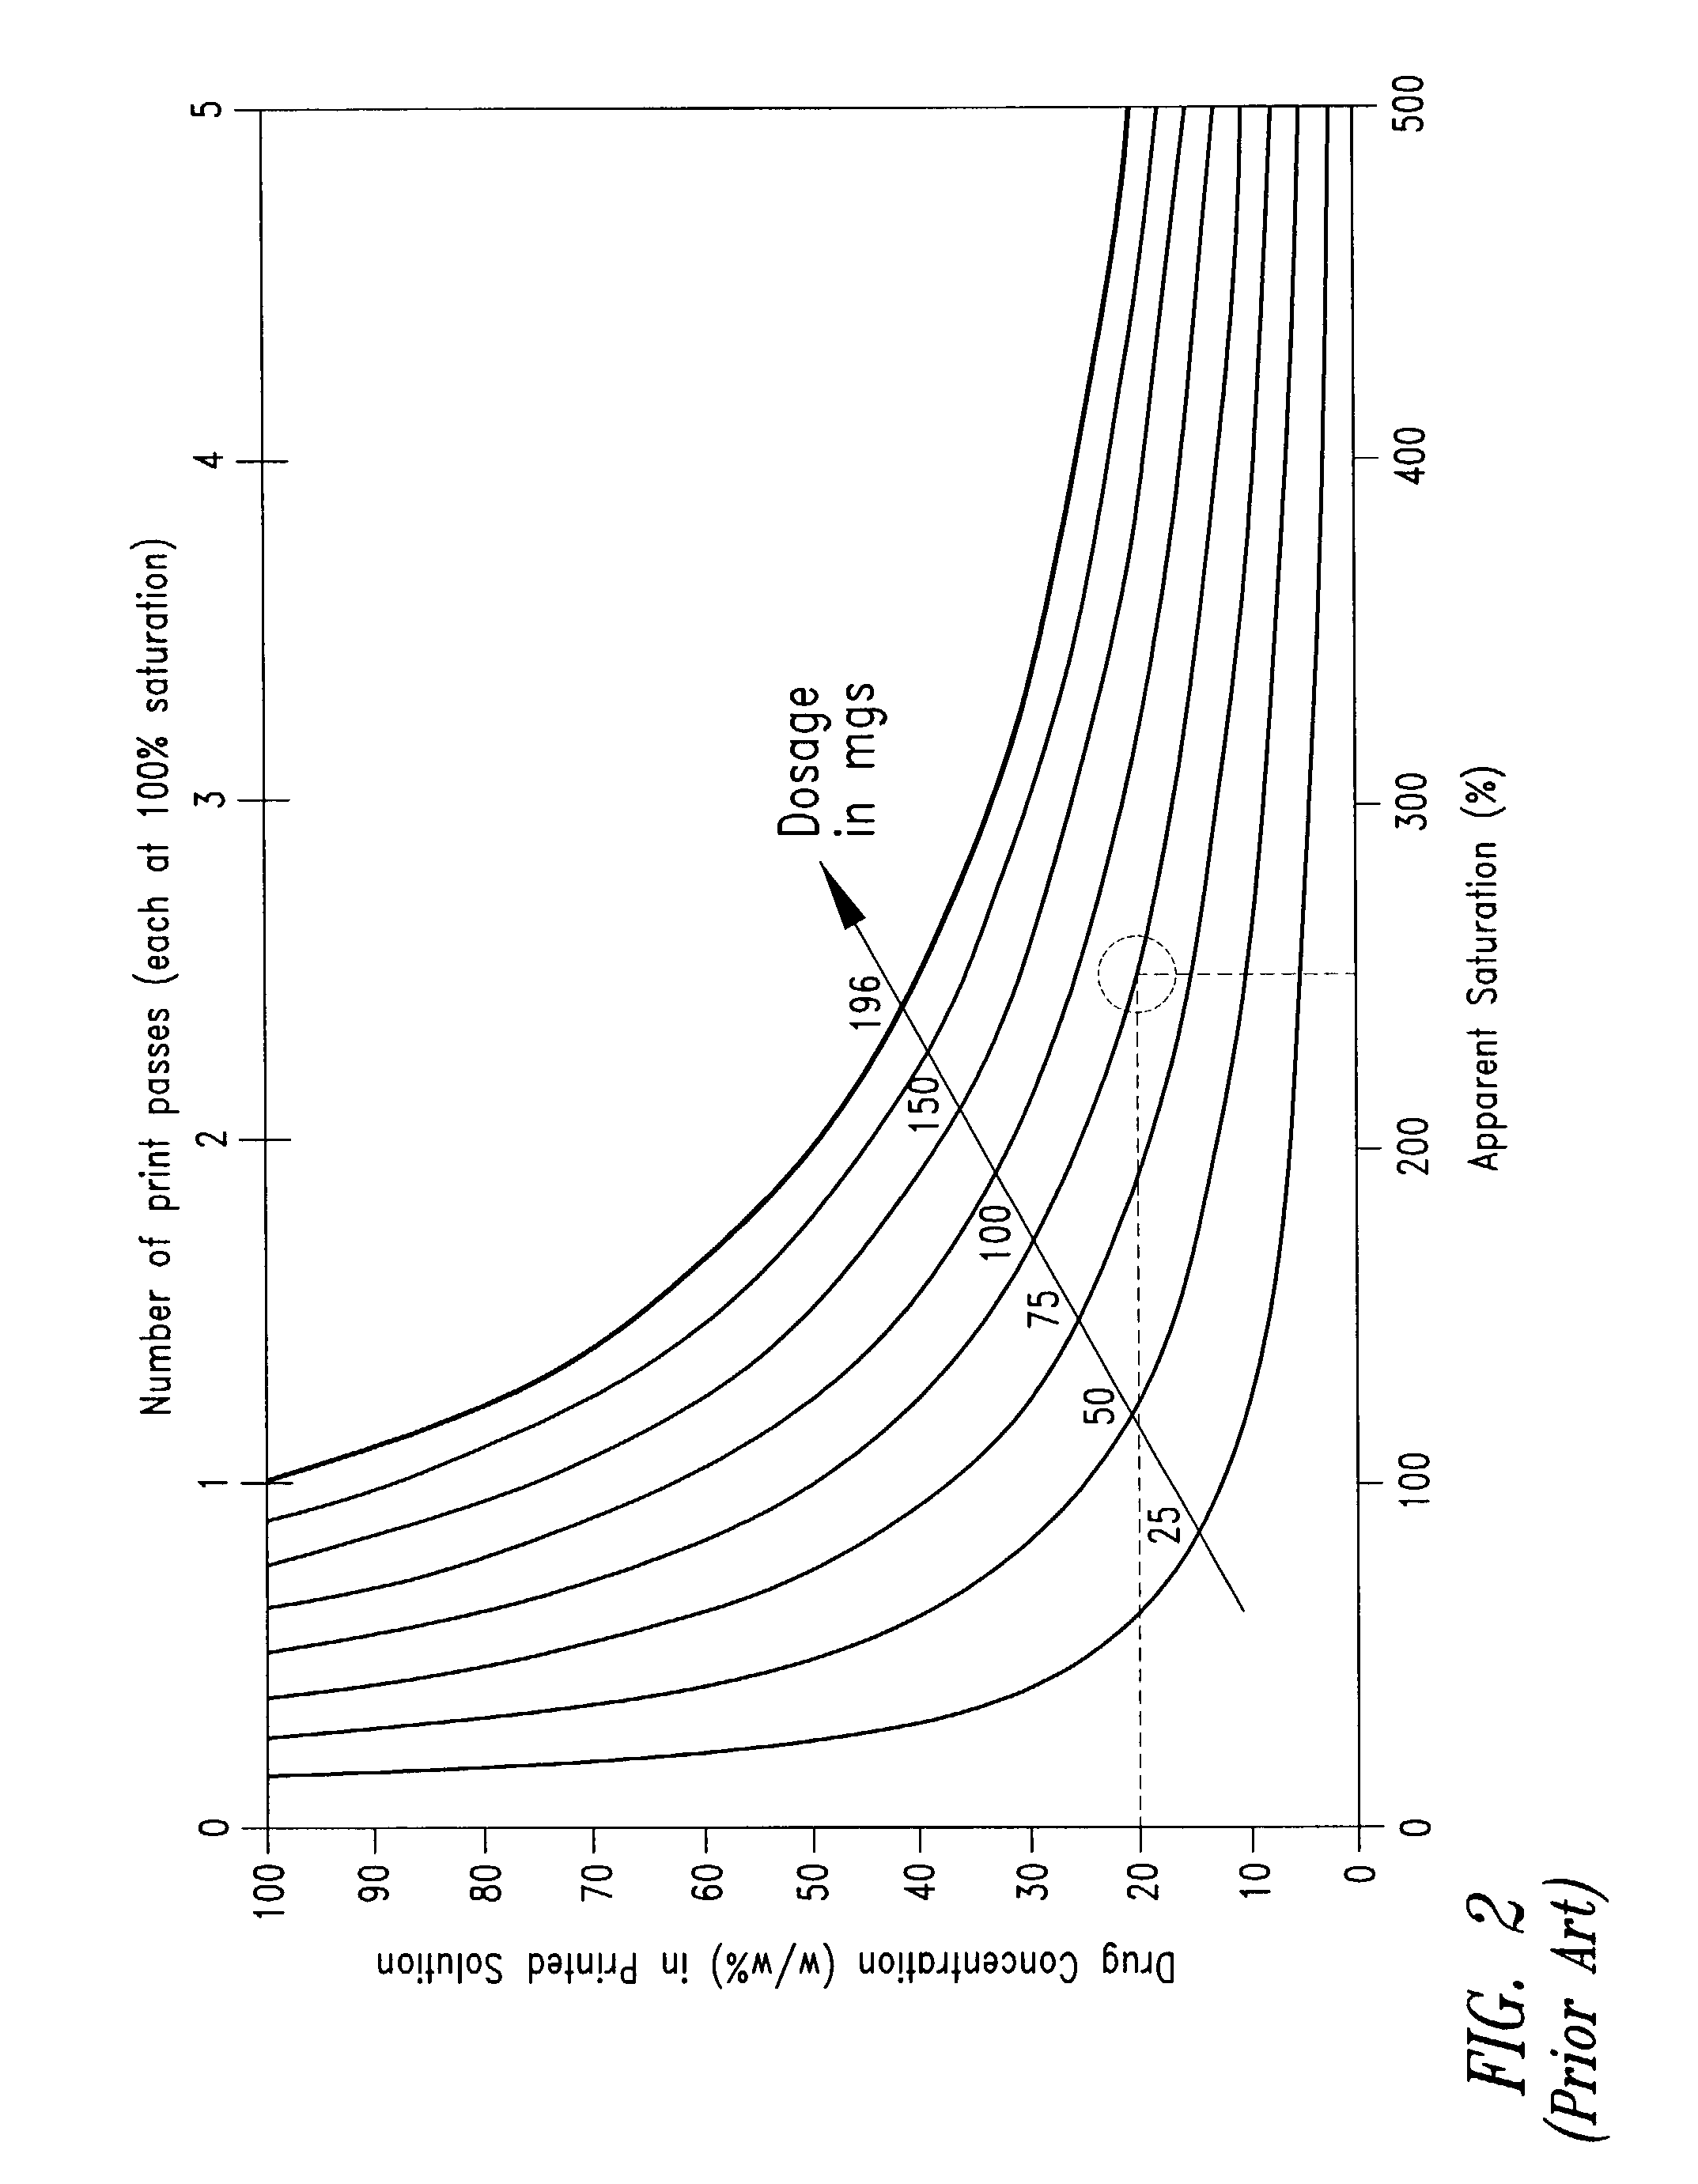 System and method for uniaxial compression of an article, such as a three-dimensionally printed dosage form